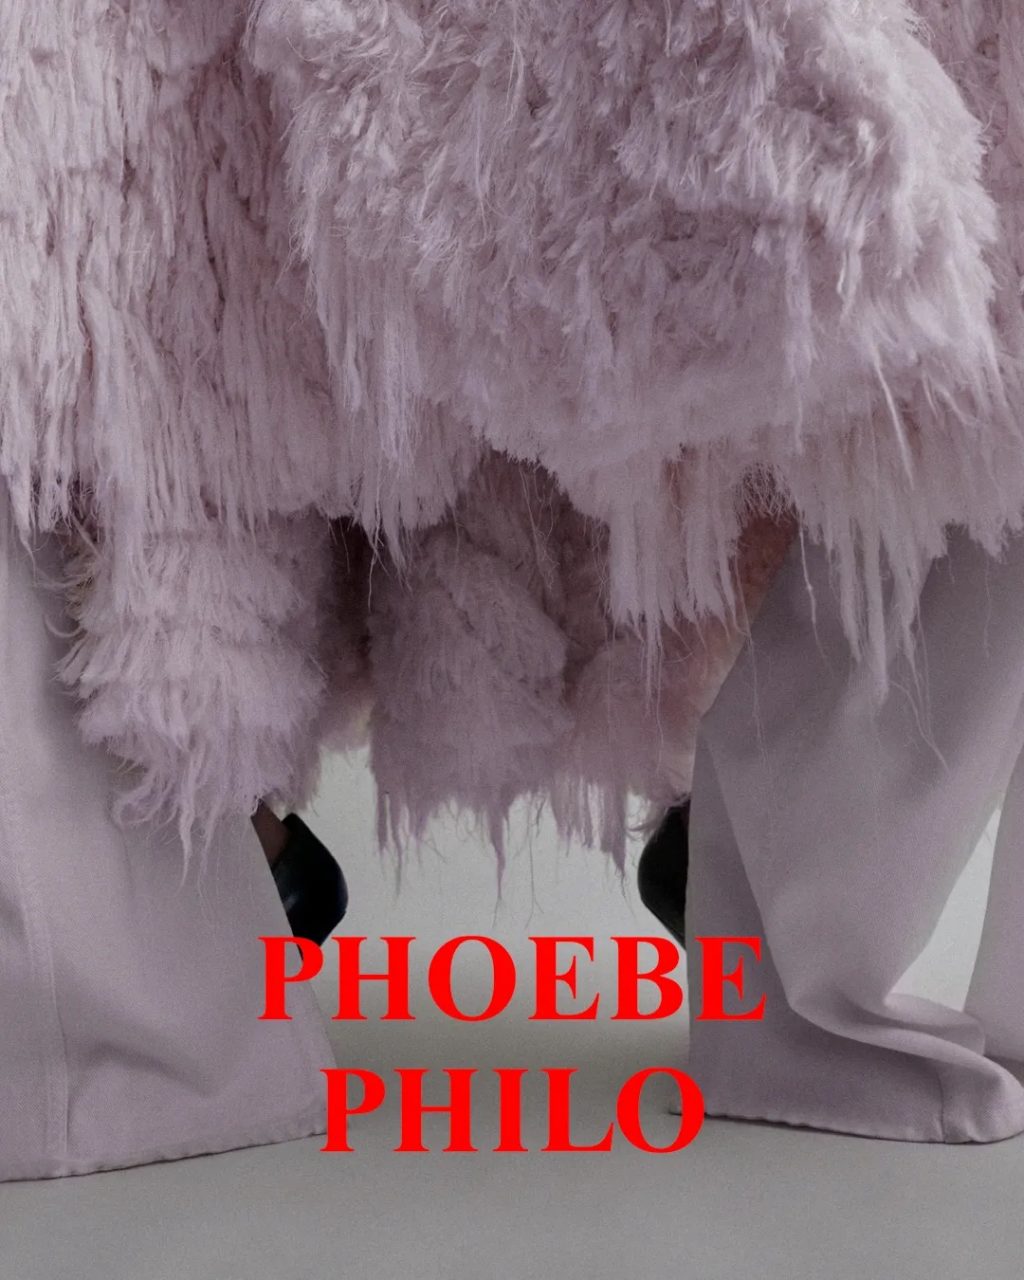 How Phoebe Philo's First Drop Missed the Mark